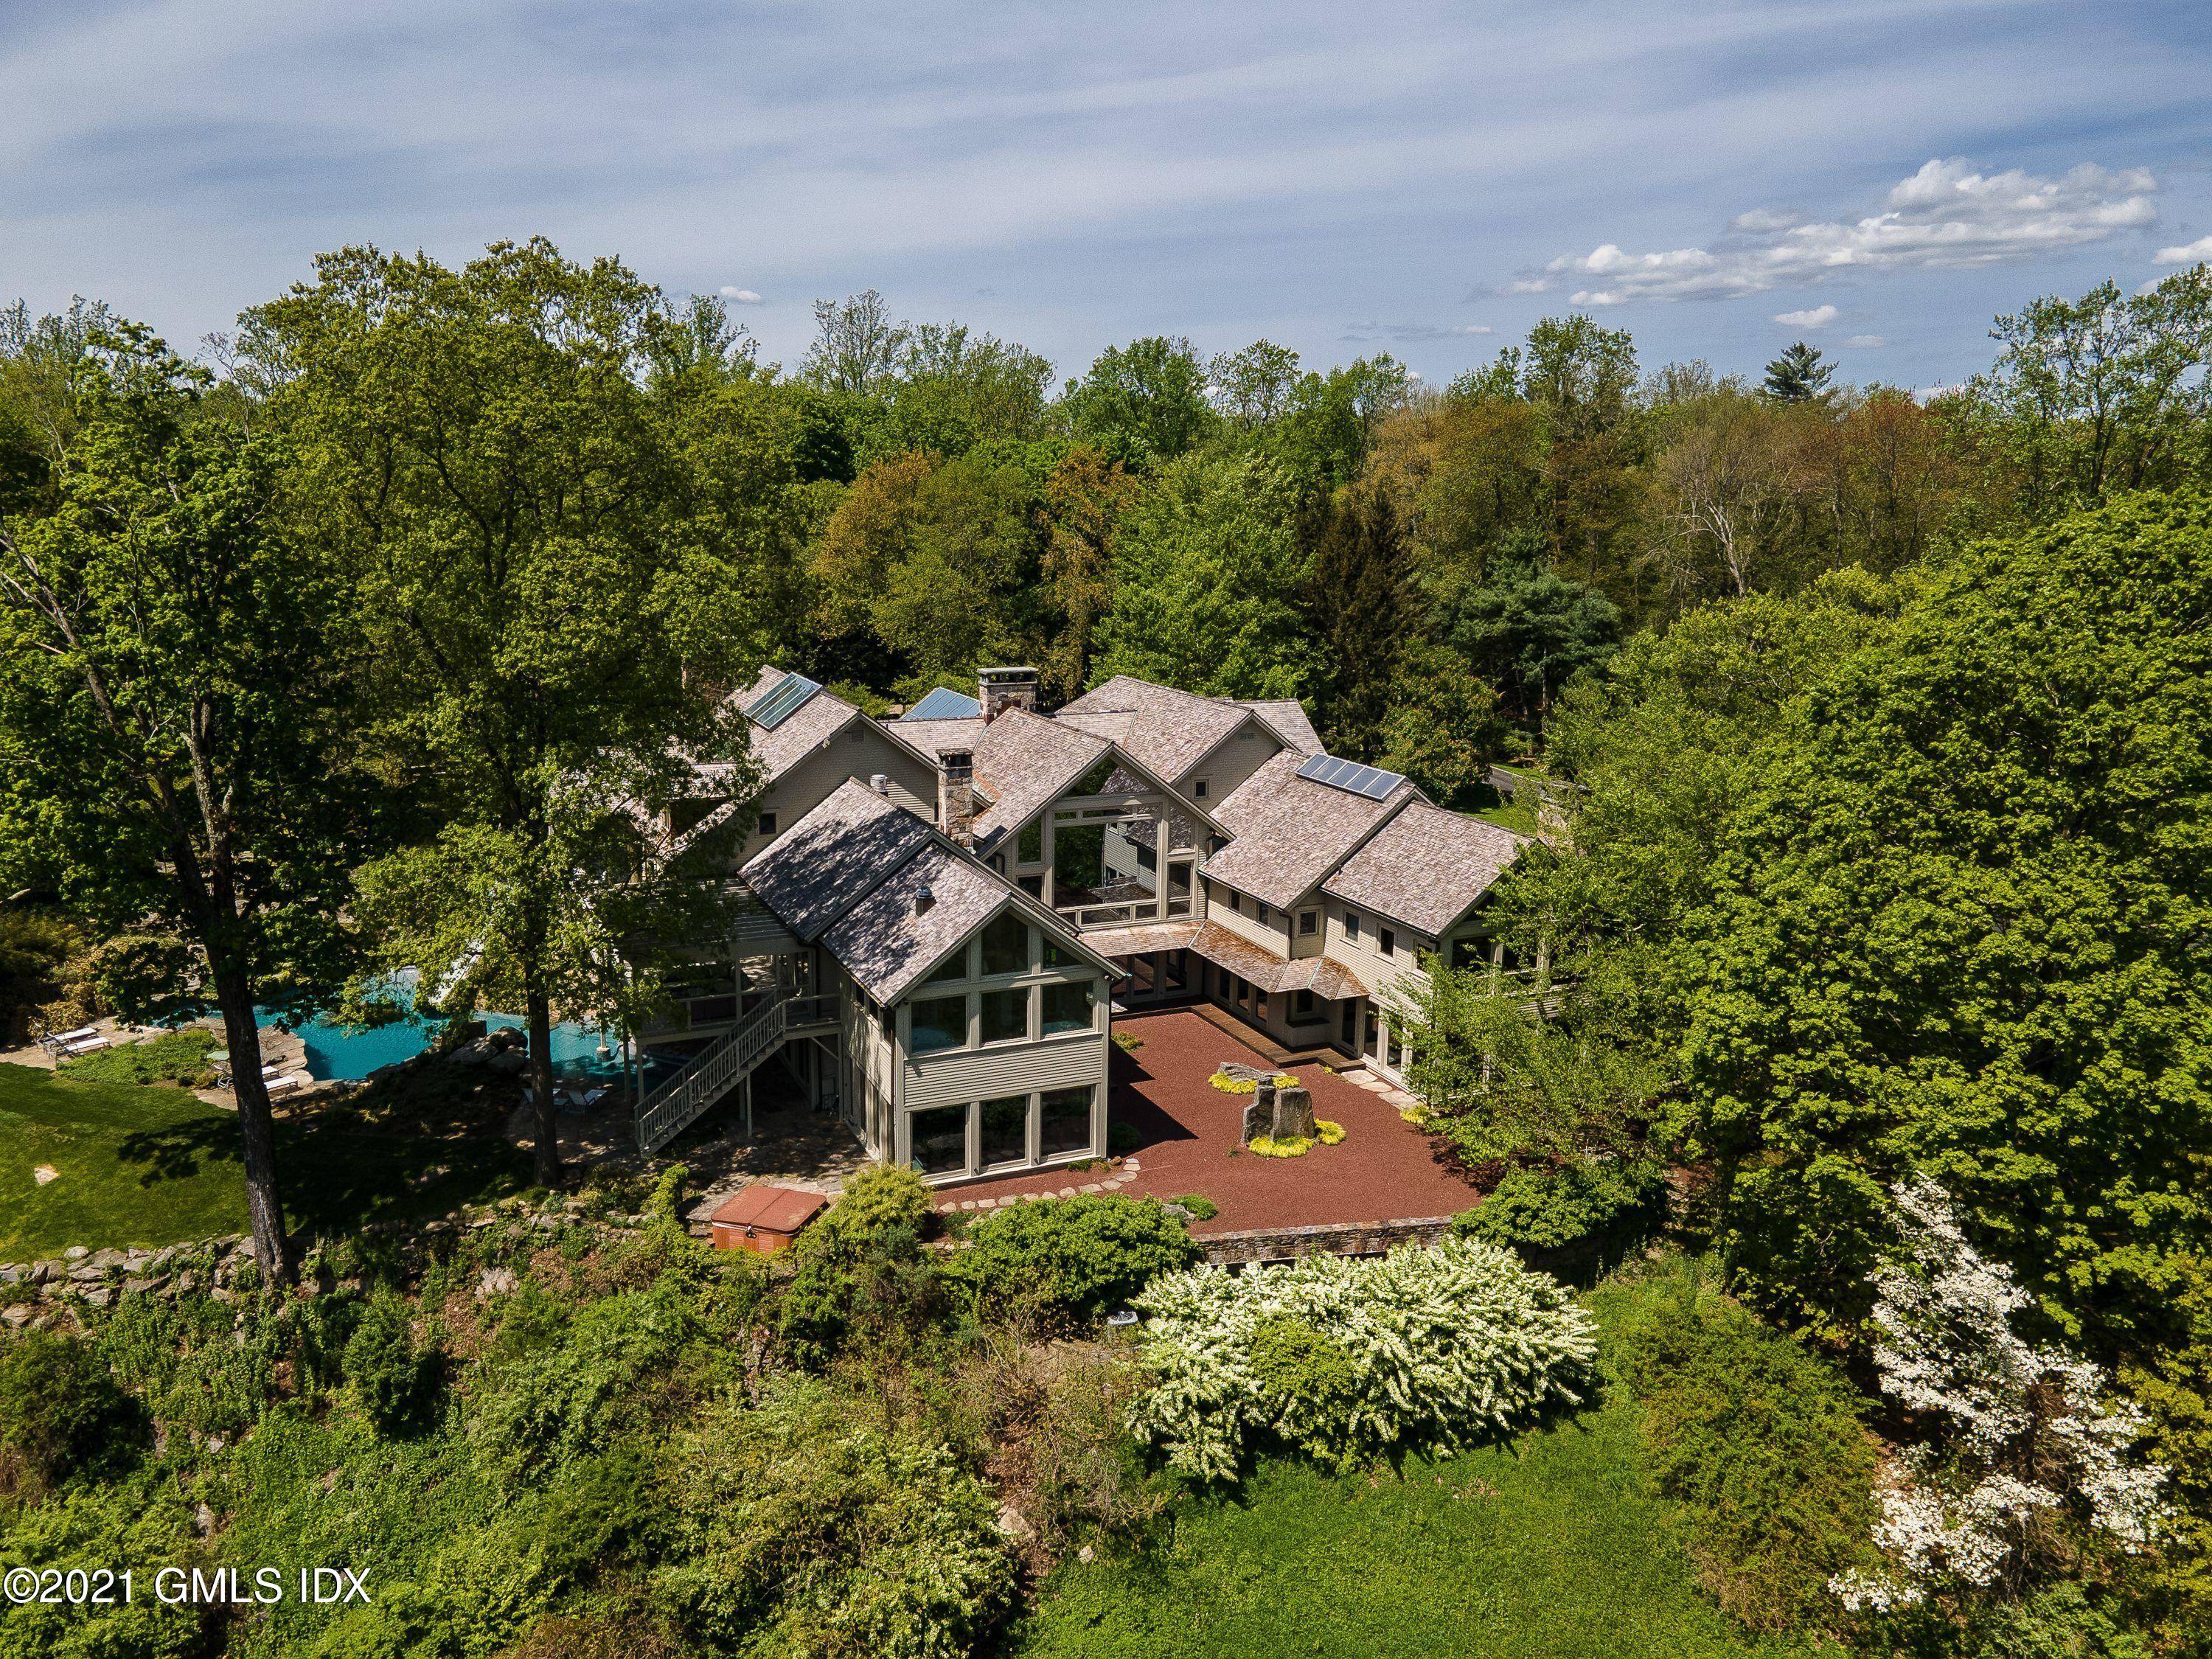 This is a once in a lifetime opportunity to own a luxurious home and 85 parklike acres in Greenwich, Connecticut.